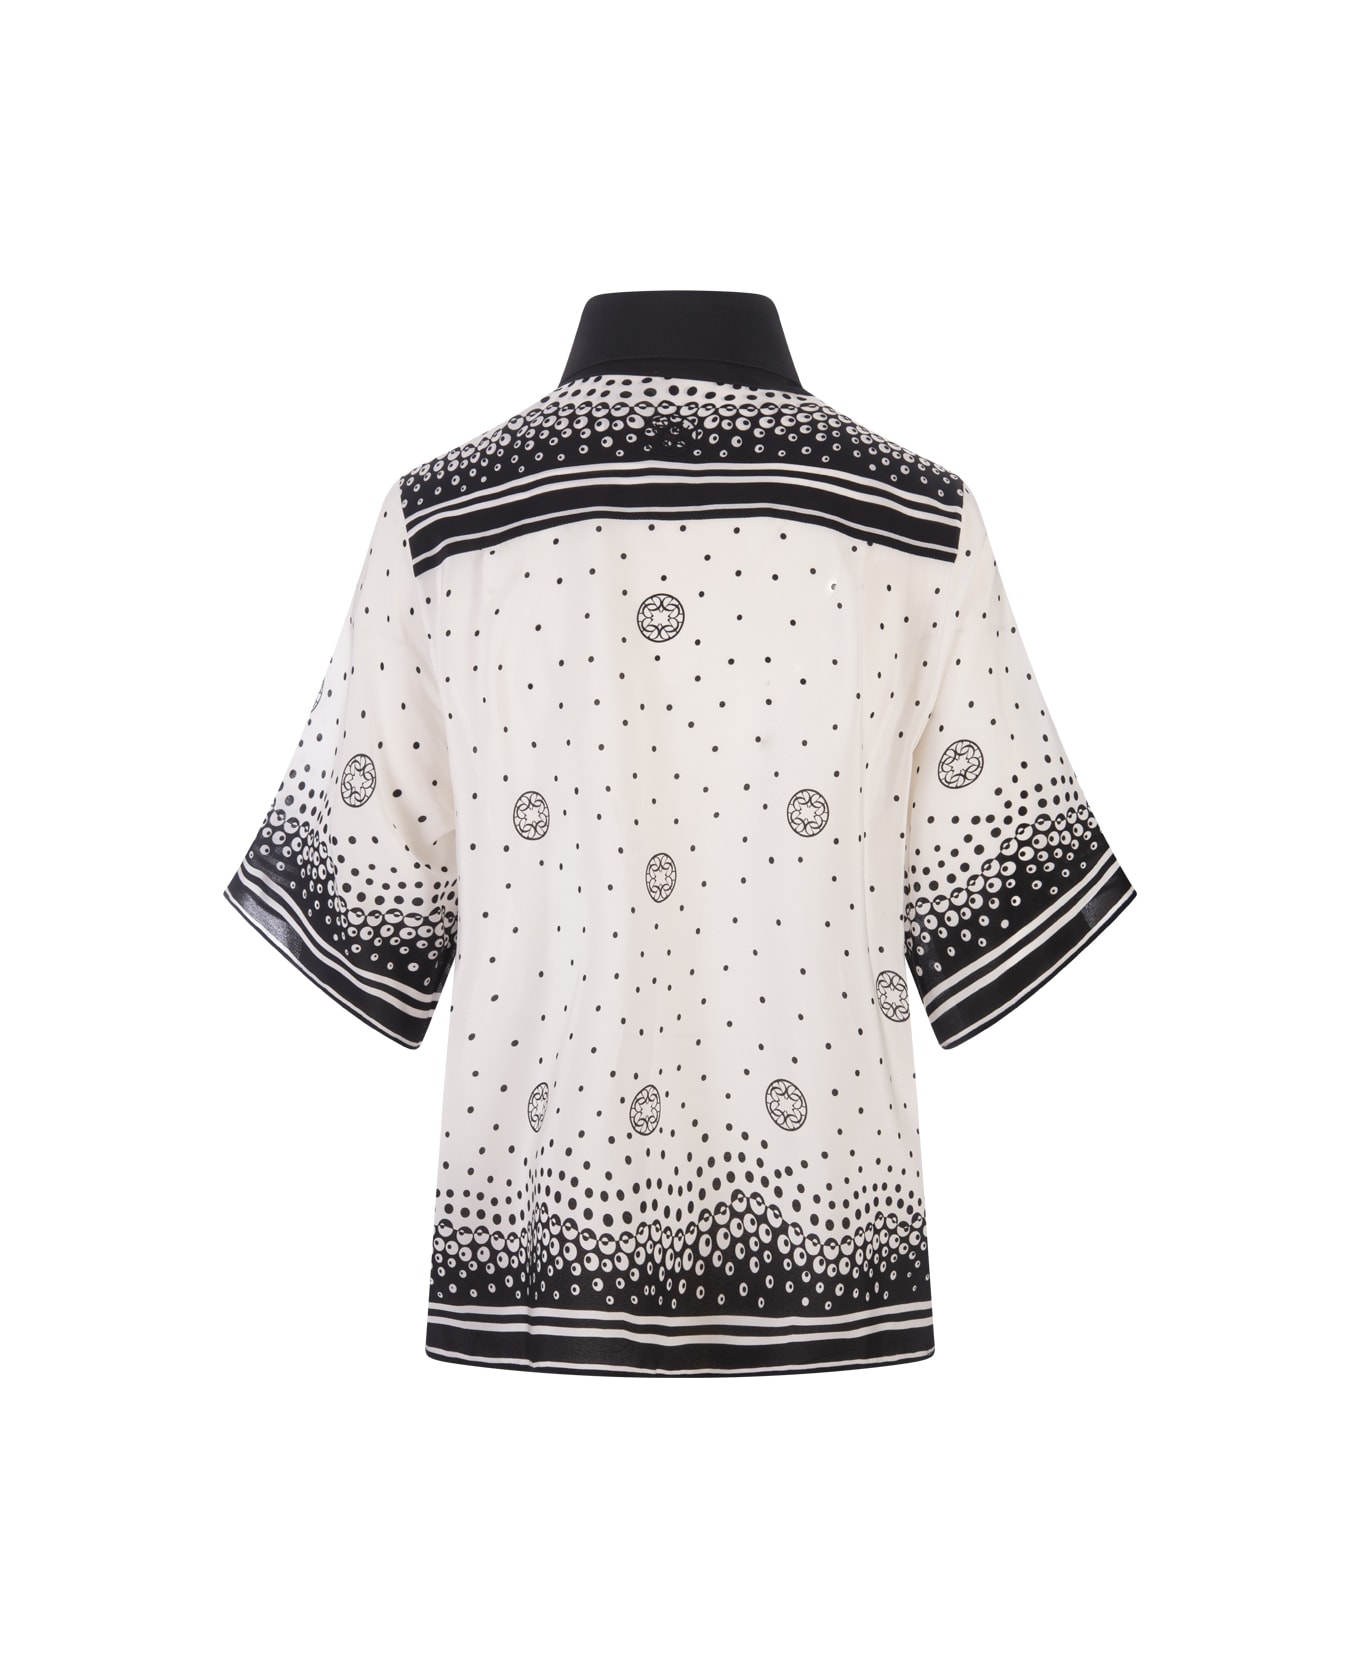 Elie Saab Moon Printed Silk Shirt In White And Black - White ブラウス